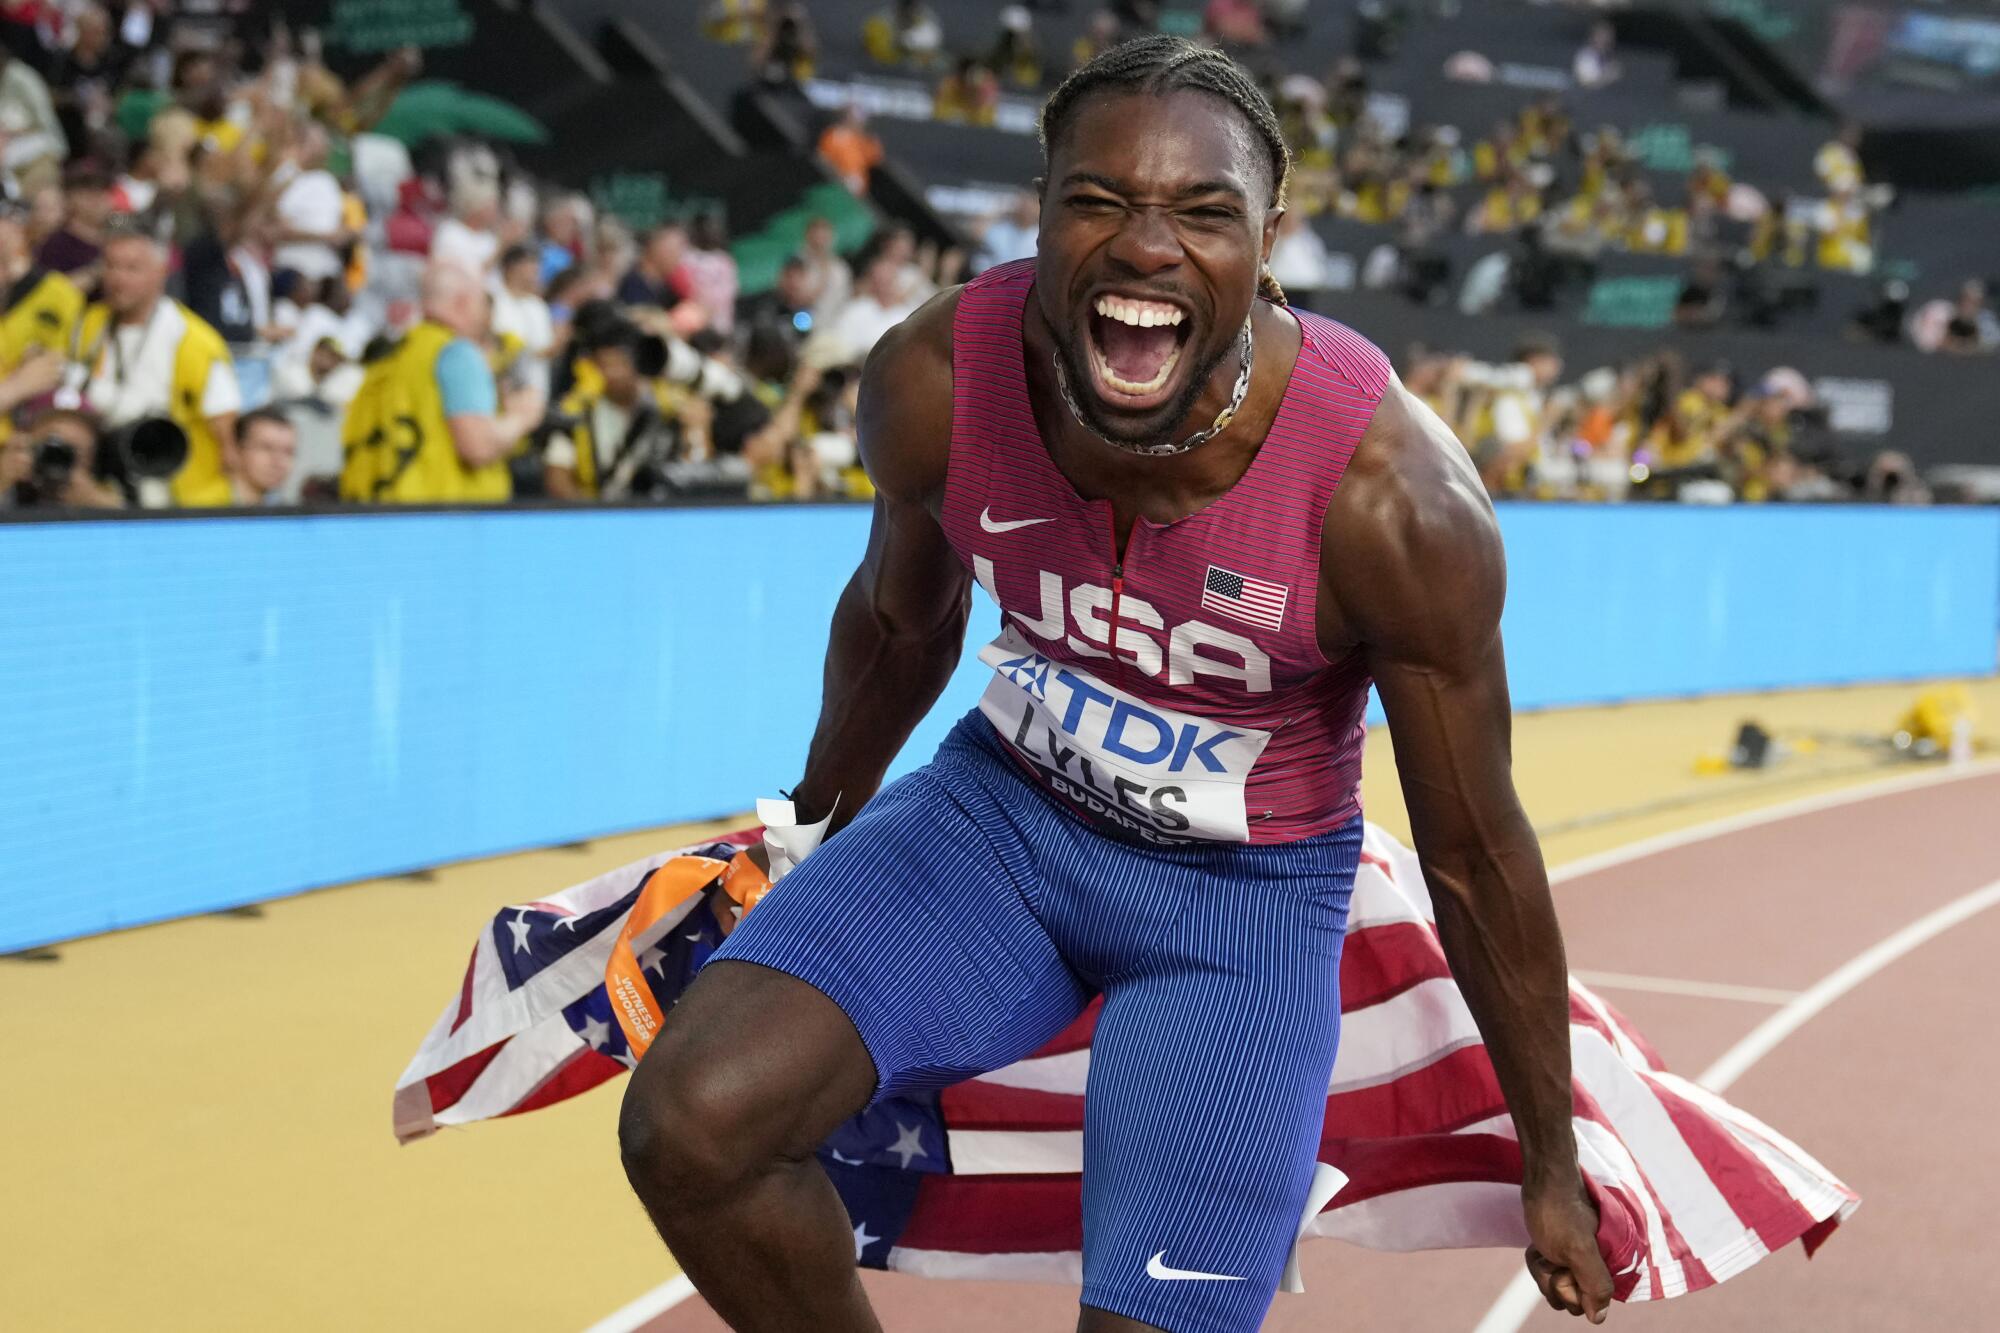 Noah Lyles celebrates after winning the gold medal in the men's 100 meters.